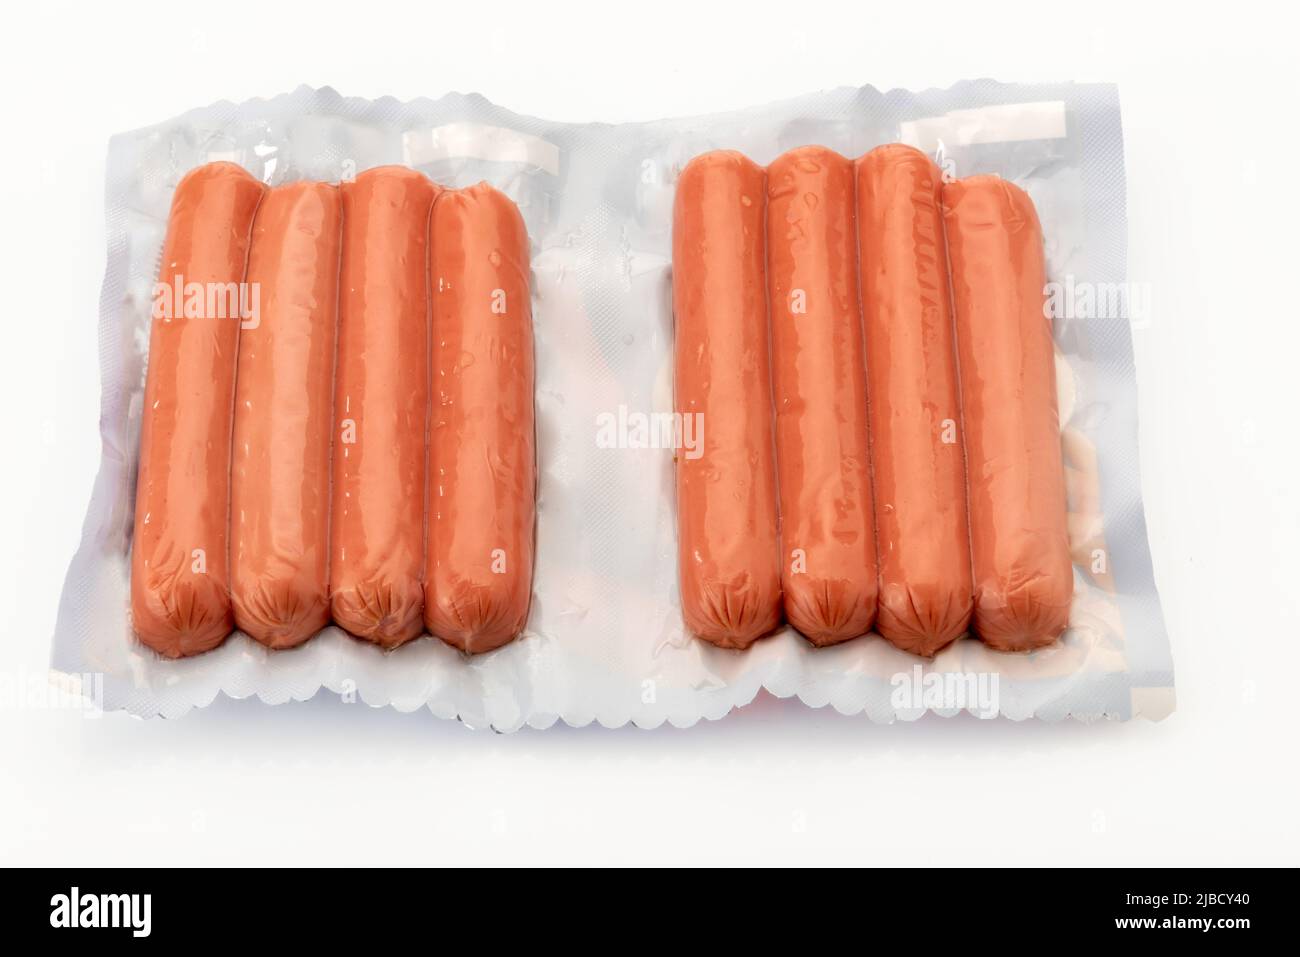 Packed Of Sausages On Weight Scale Stock Photo by ©SimpleFoto 58449845